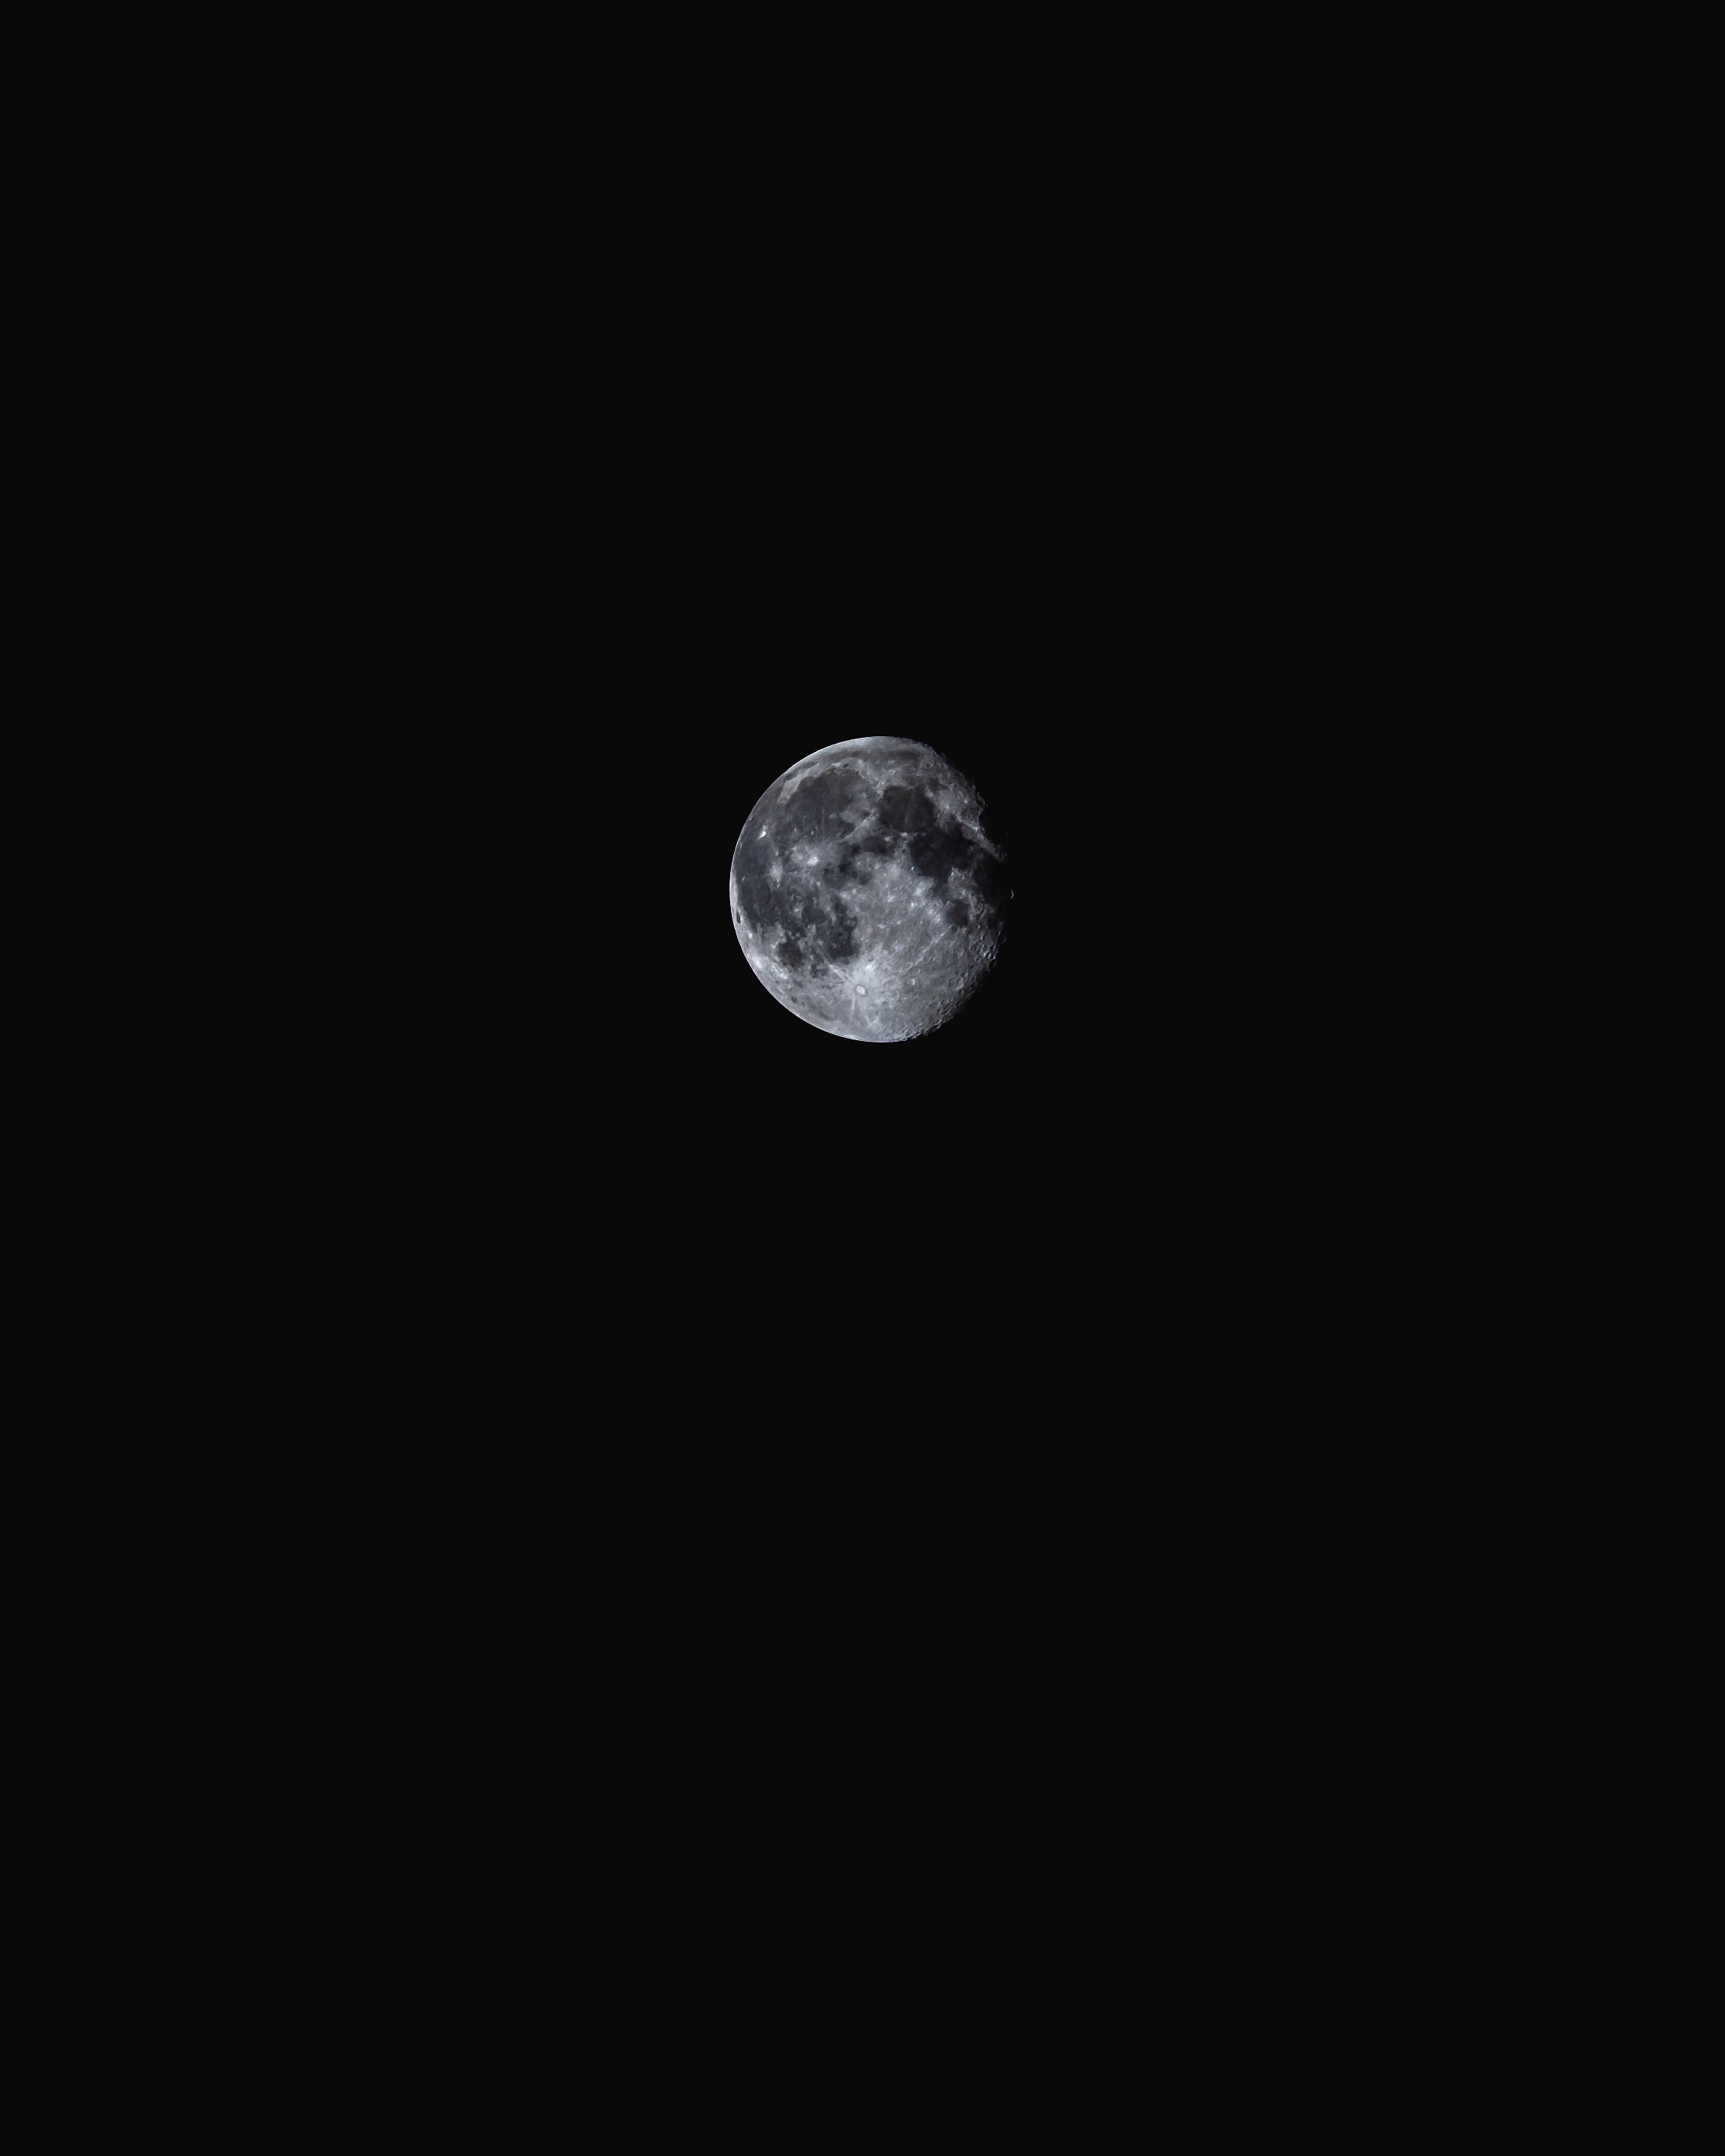 moon, black, bw, chb, full moon cell phone wallpapers